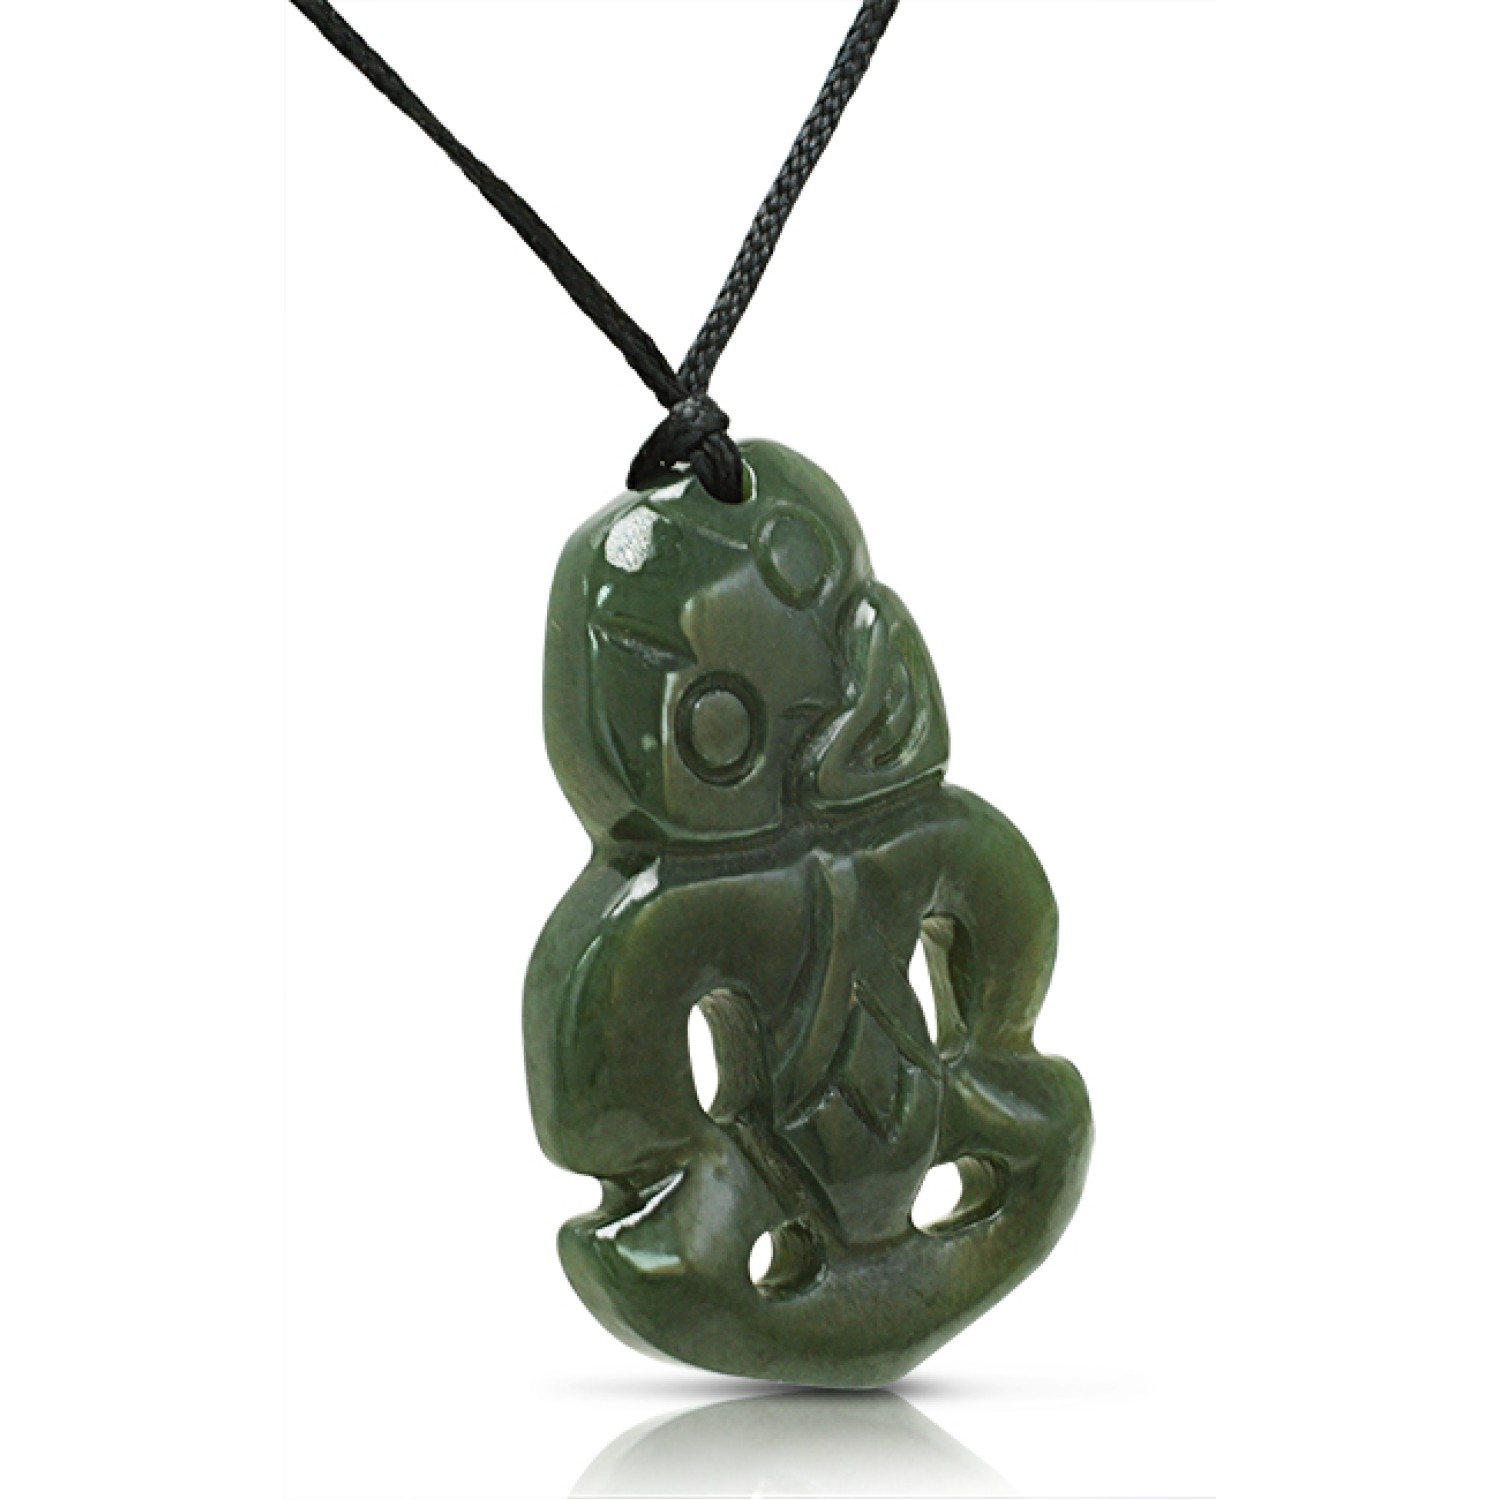 Greenstone Tiki. In Māori mythology, Tiki is the first man, created by either Tūmatauenga or Tāne. He found the first woman, Marikoriko, in a pond—she seduced him and he became the father of  @christies.online